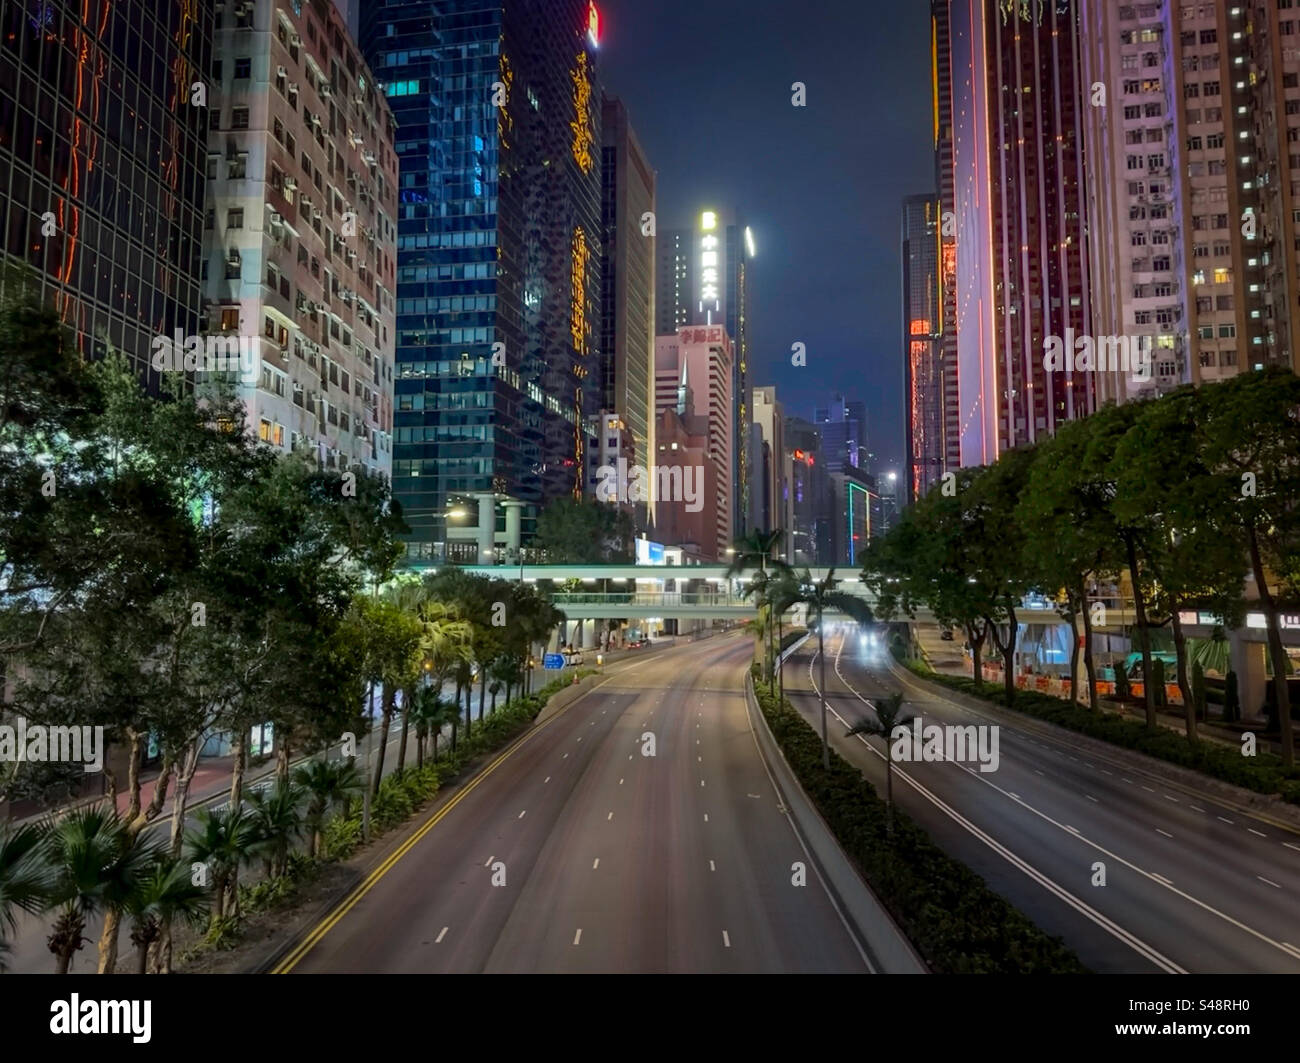 Wan chai district in Hong Kong at night from Gloucester street Stock Photo